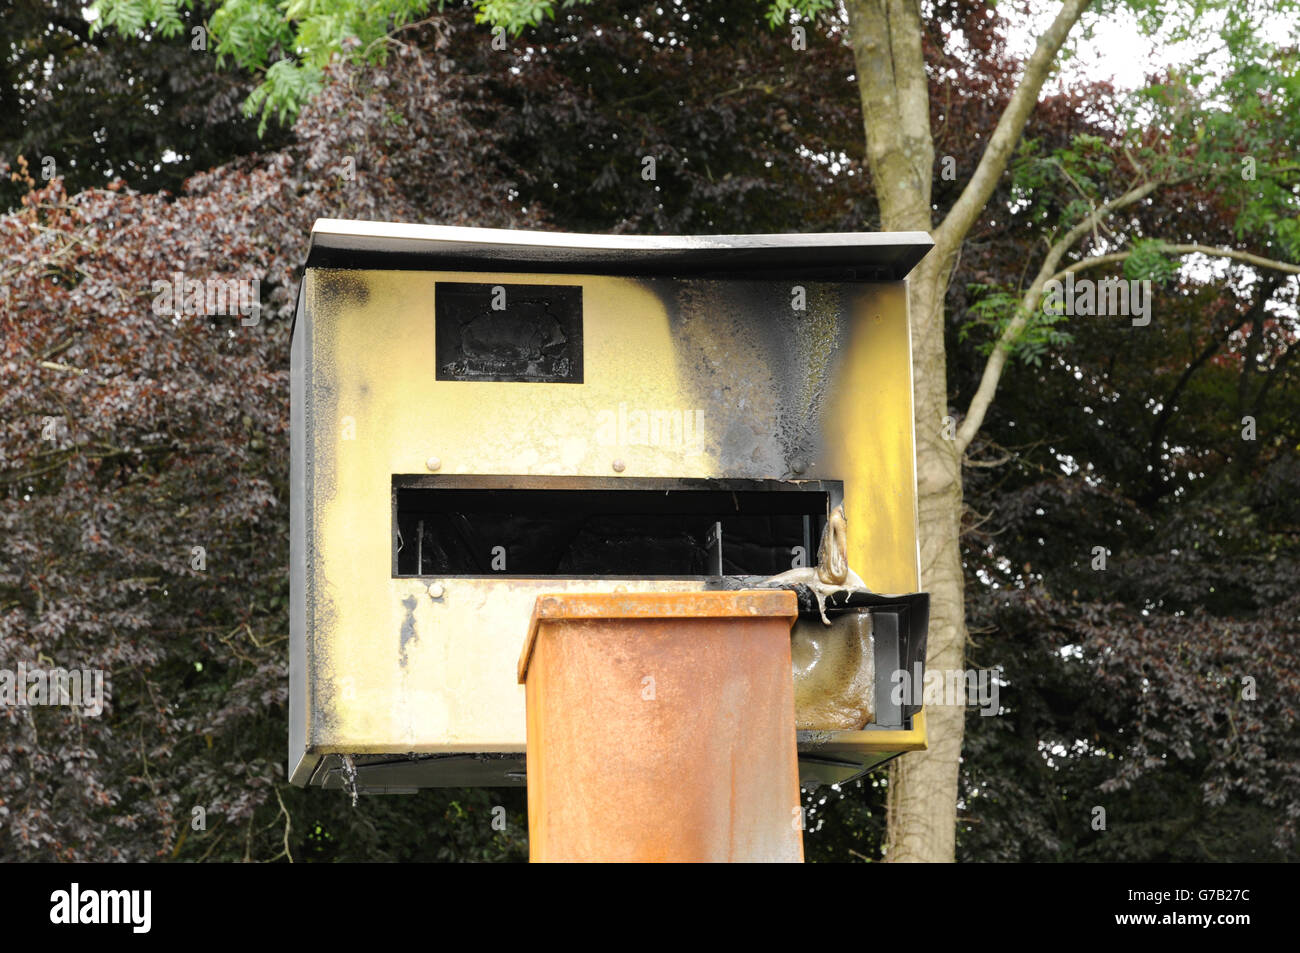 A burned out speed camera at the roadside in the East Sussex village of Nutley. Stock Photo